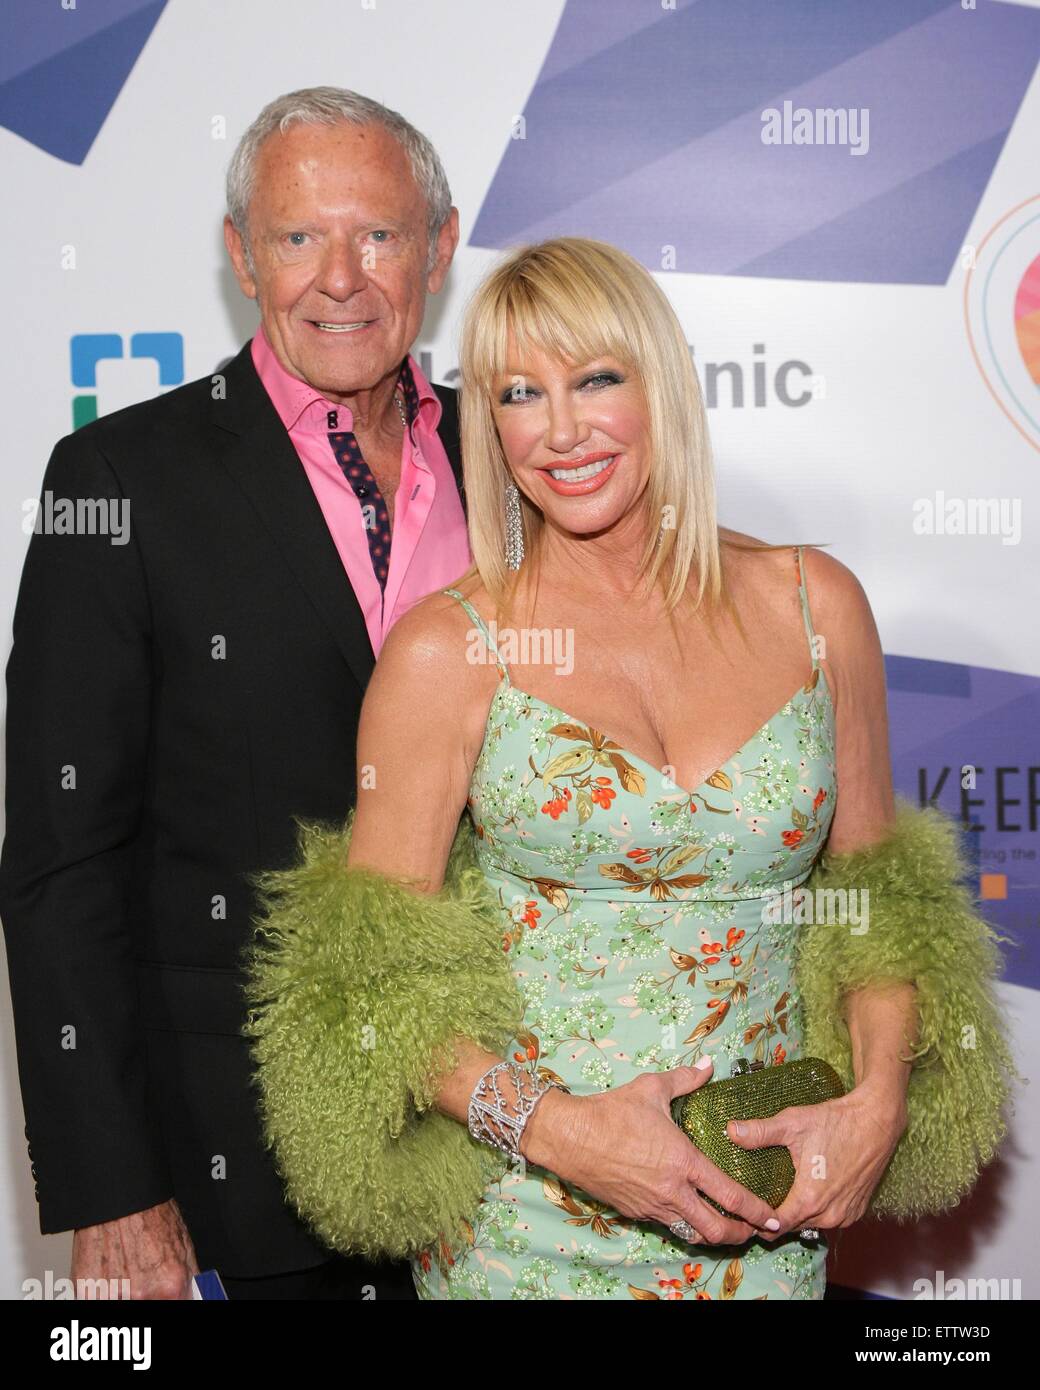 Alan Hamel, Suzanne Somers at arrivals for Keep Memory Alive 19th Annual Power of Love Gala, MGM Grand Garden Arena, Las Vegas, NV June 13, 2015. Photo By: James Atoa/Everett Collection Stock Photo